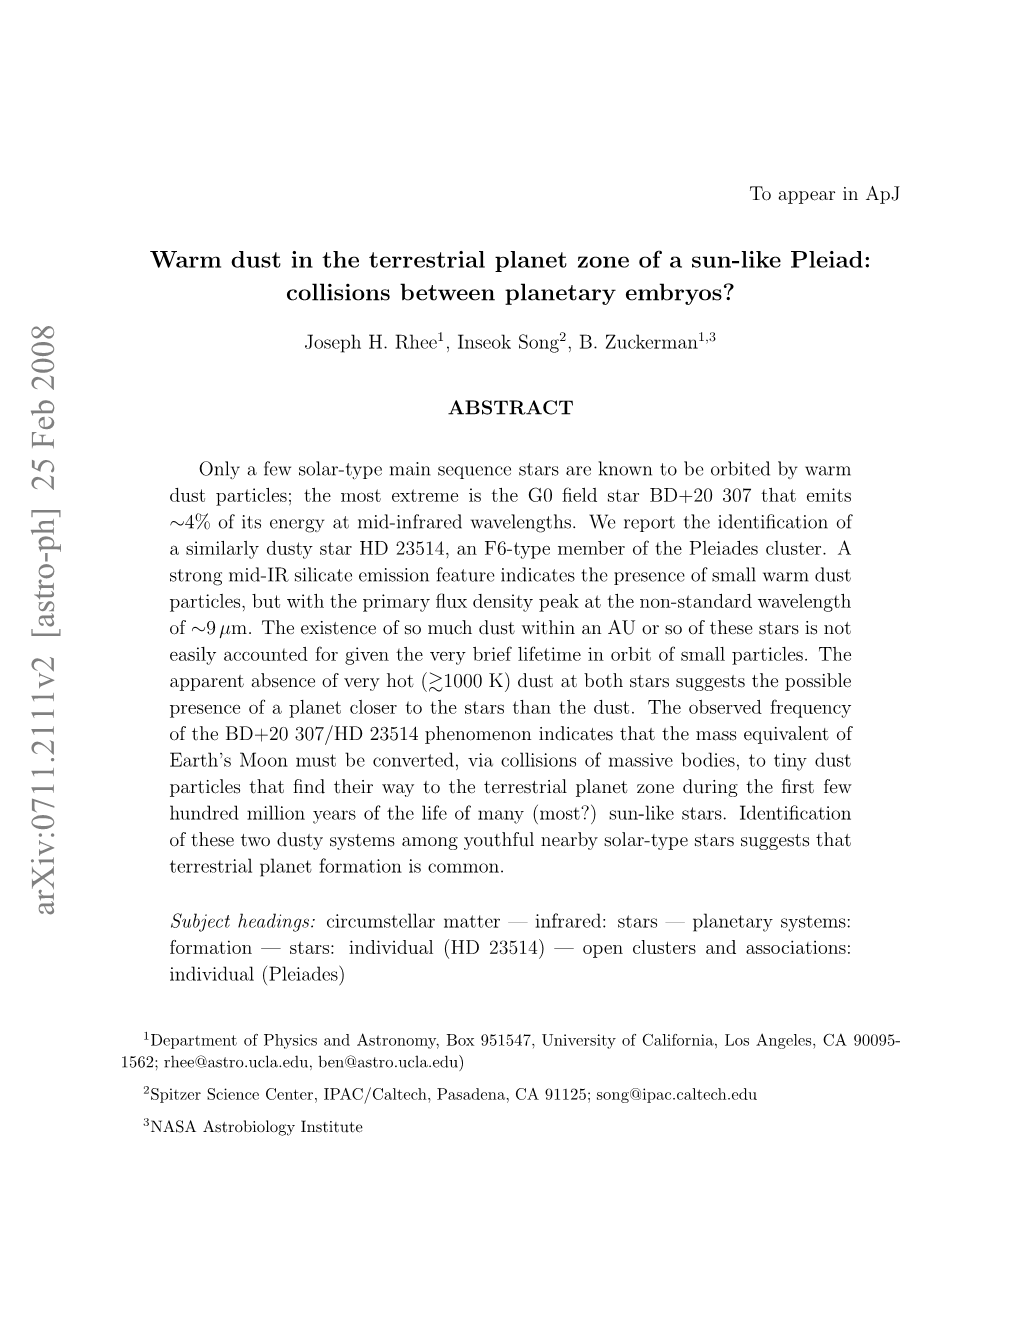 Warm Dust in the Terrestrial Planet Zone of a Sun-Like Pleiad: Collisions Between Planetary Embryos?